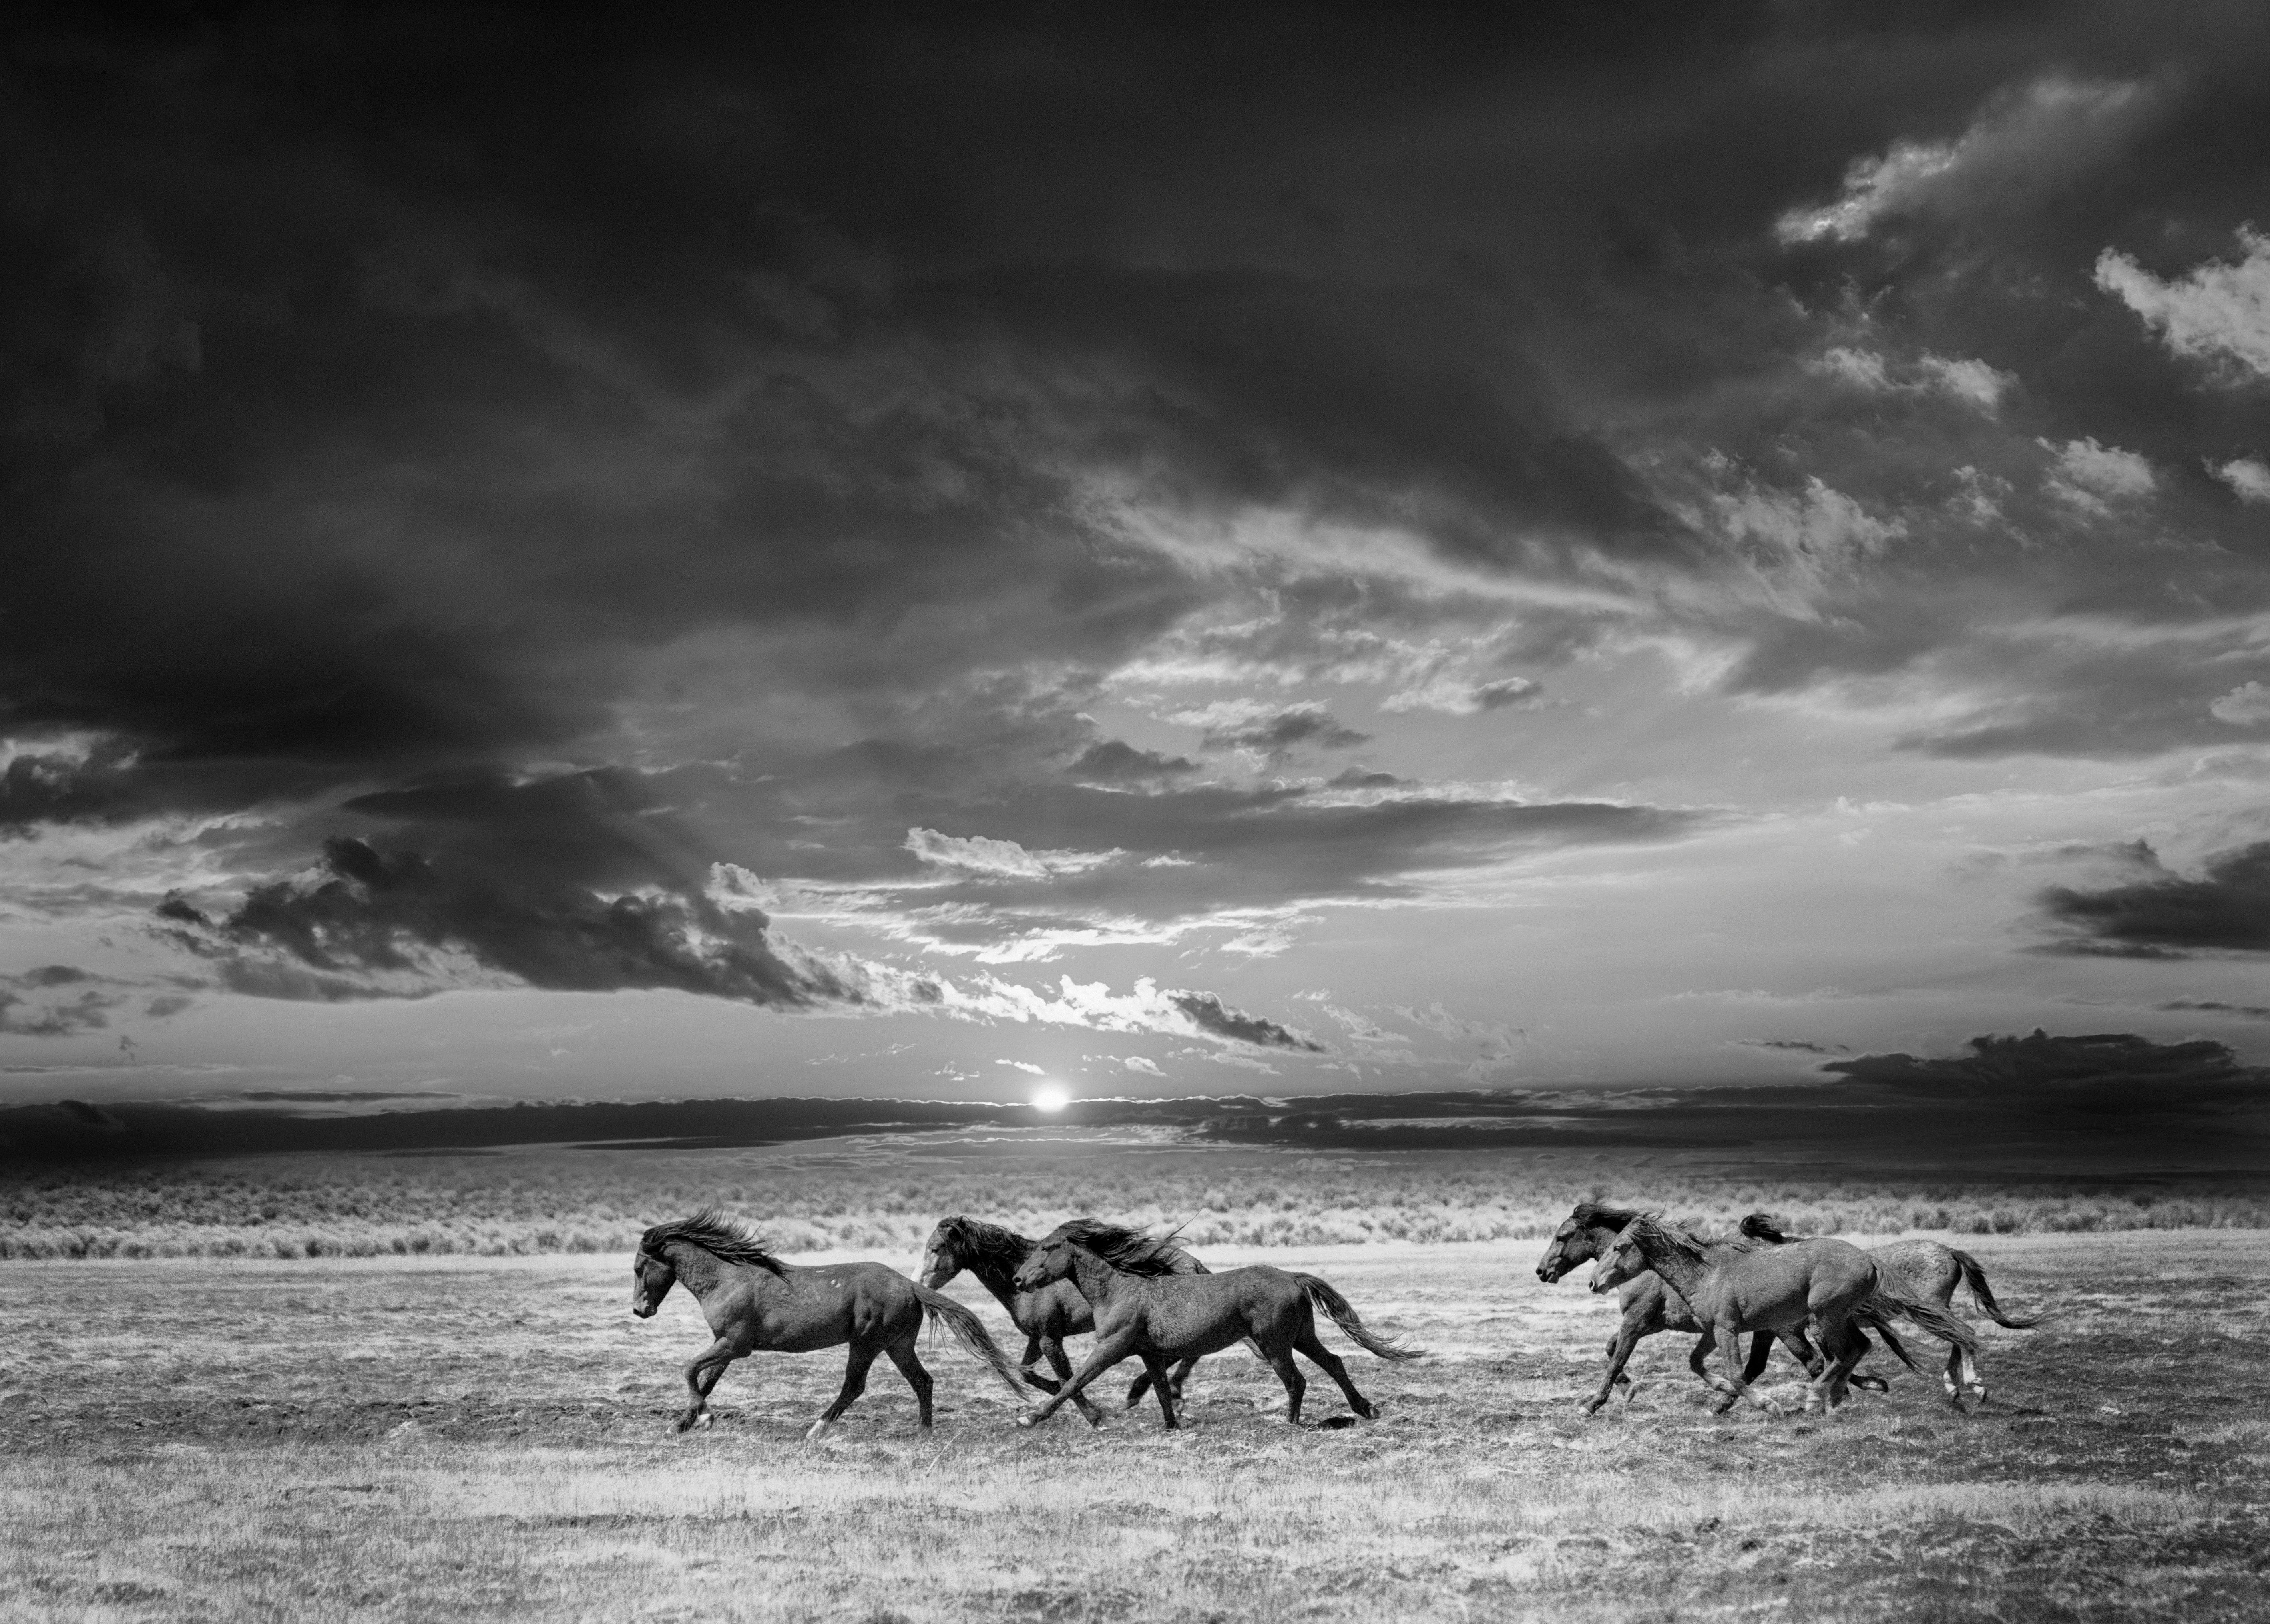 Shane Russeck Animal Print - Chasing the Light 60x40- Contemporary Black and White Photography of Wild Horses